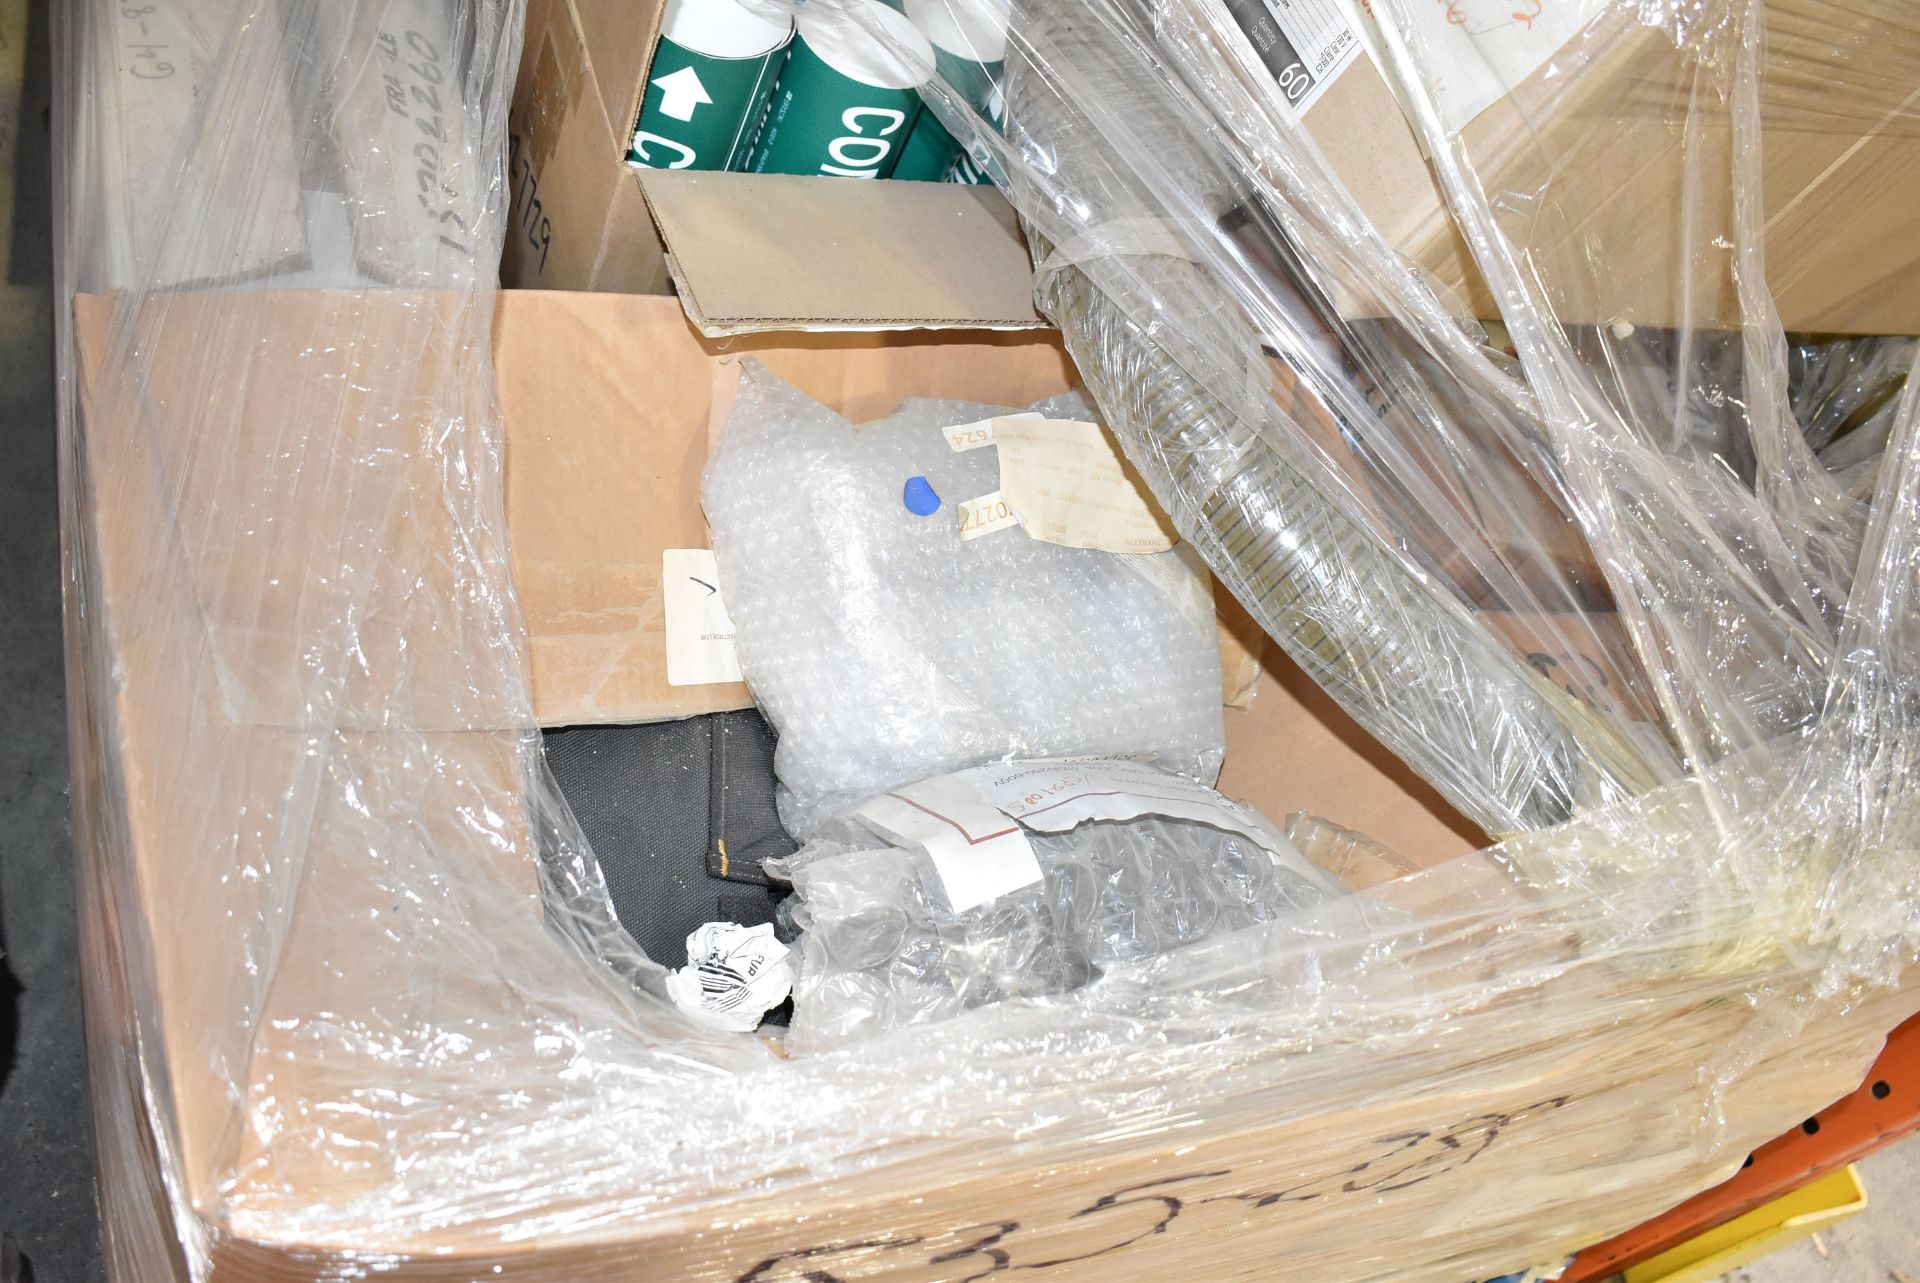 LOT/ PALLET OF SPARE PARTS CONSISTING OF TRANSFORMERS, LAMPS, TEES, MARKERS, BASEBOARD HEATERS, TOOL - Image 3 of 7